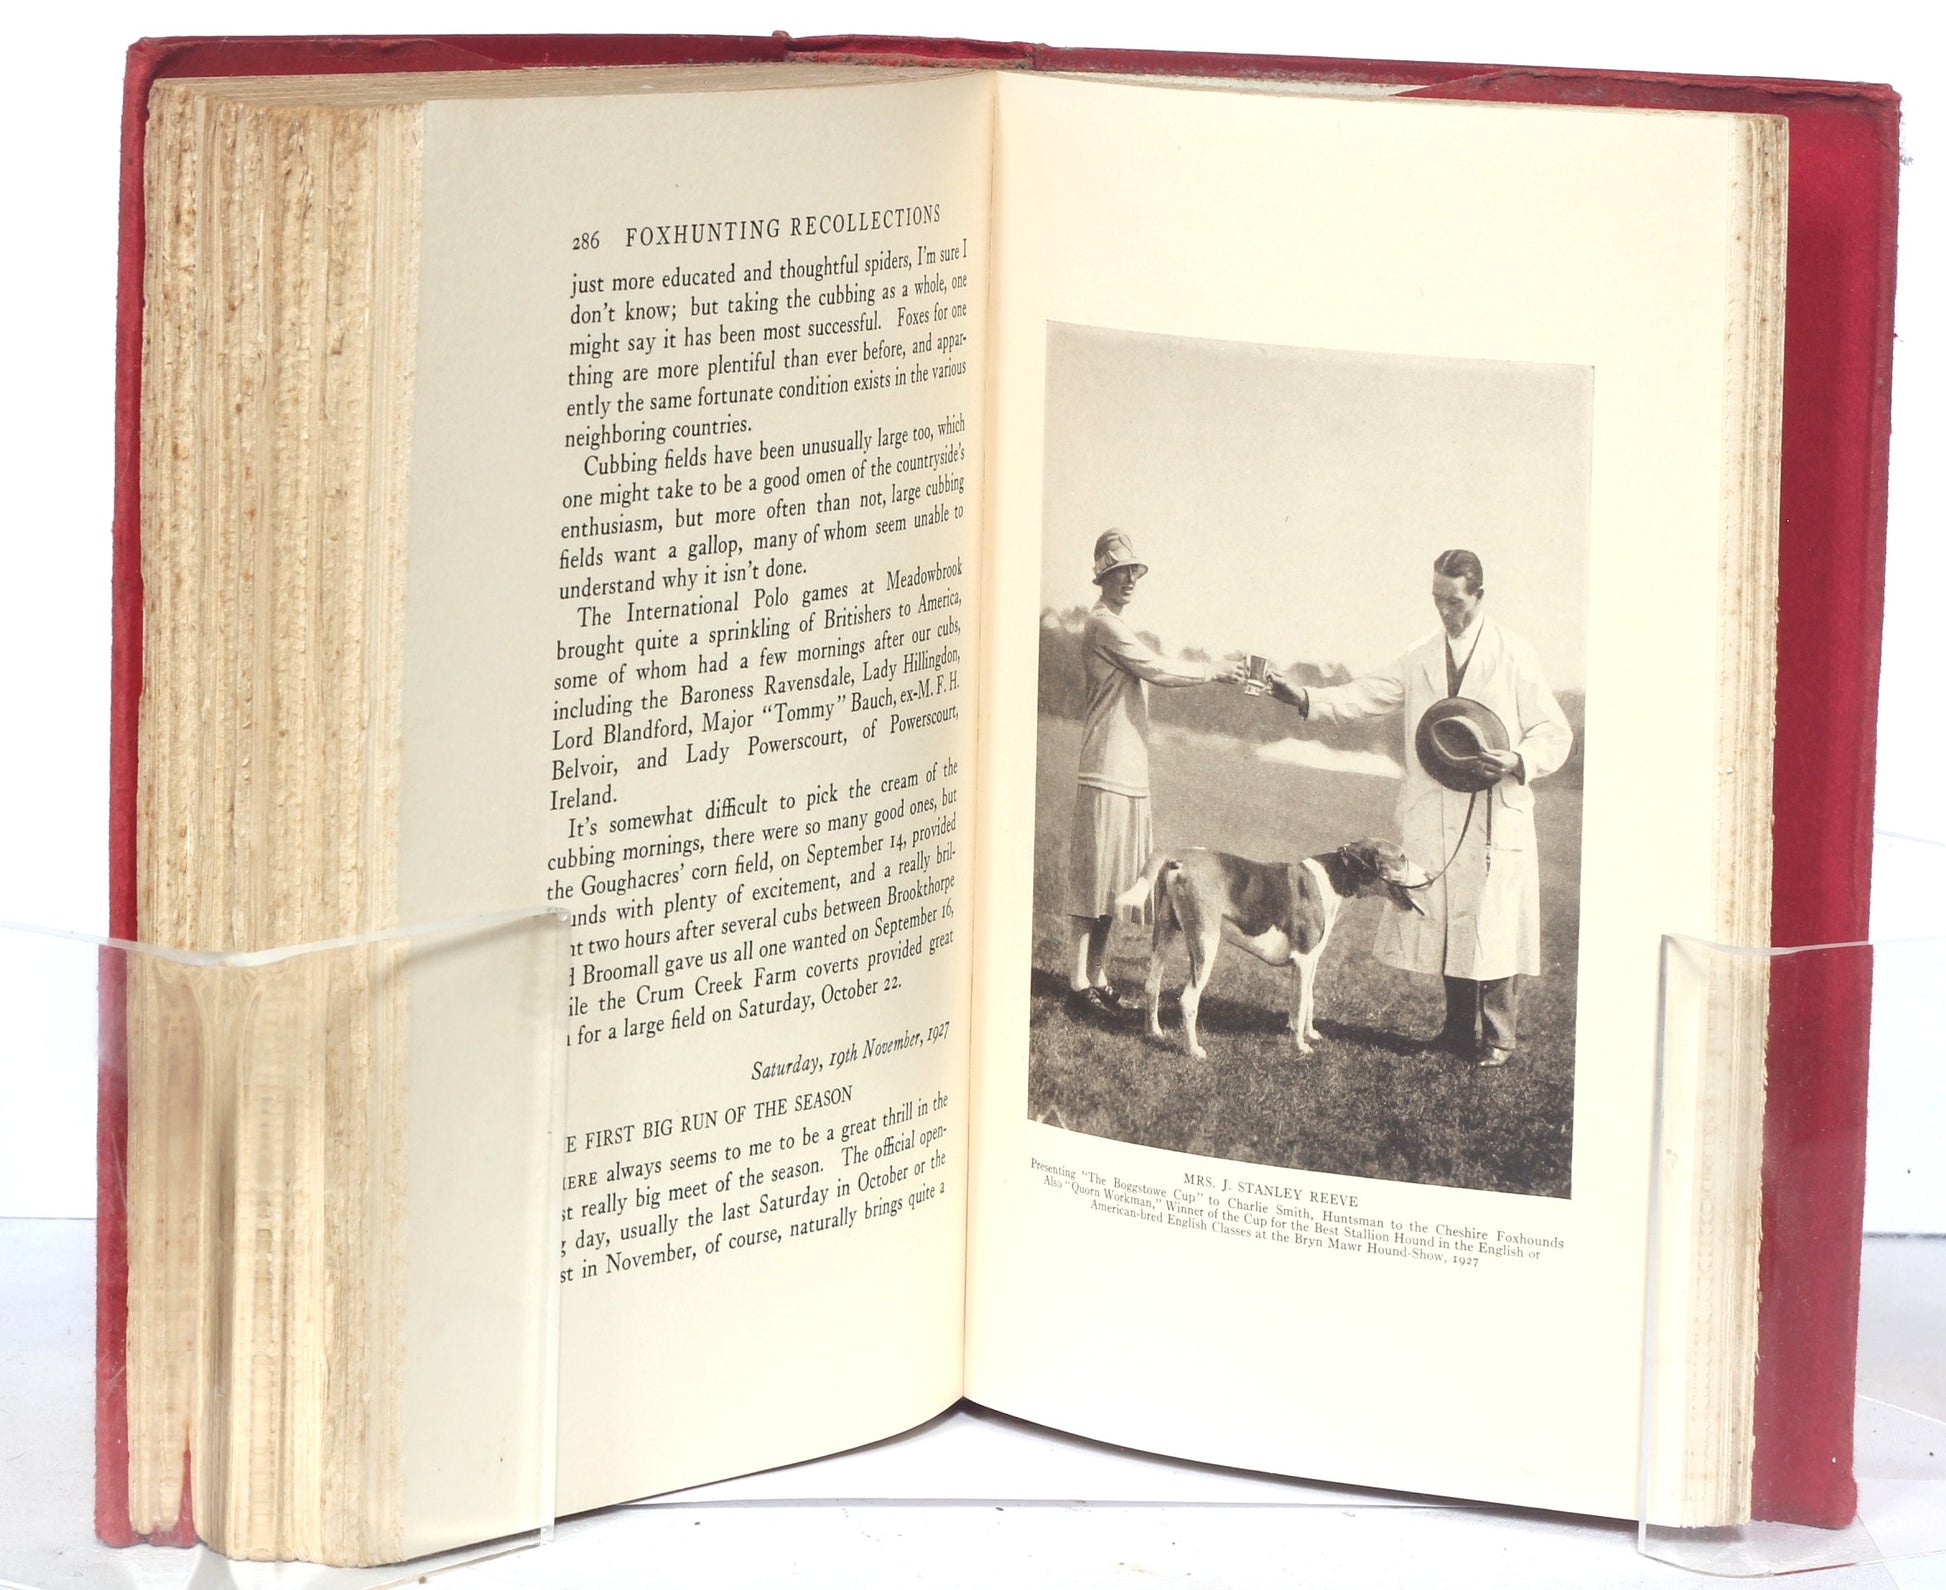 Foxhunting Recollections, A journal of the Radnor Hounds and Other Packs by J. stanley Reeve, 1st Ed. 1928